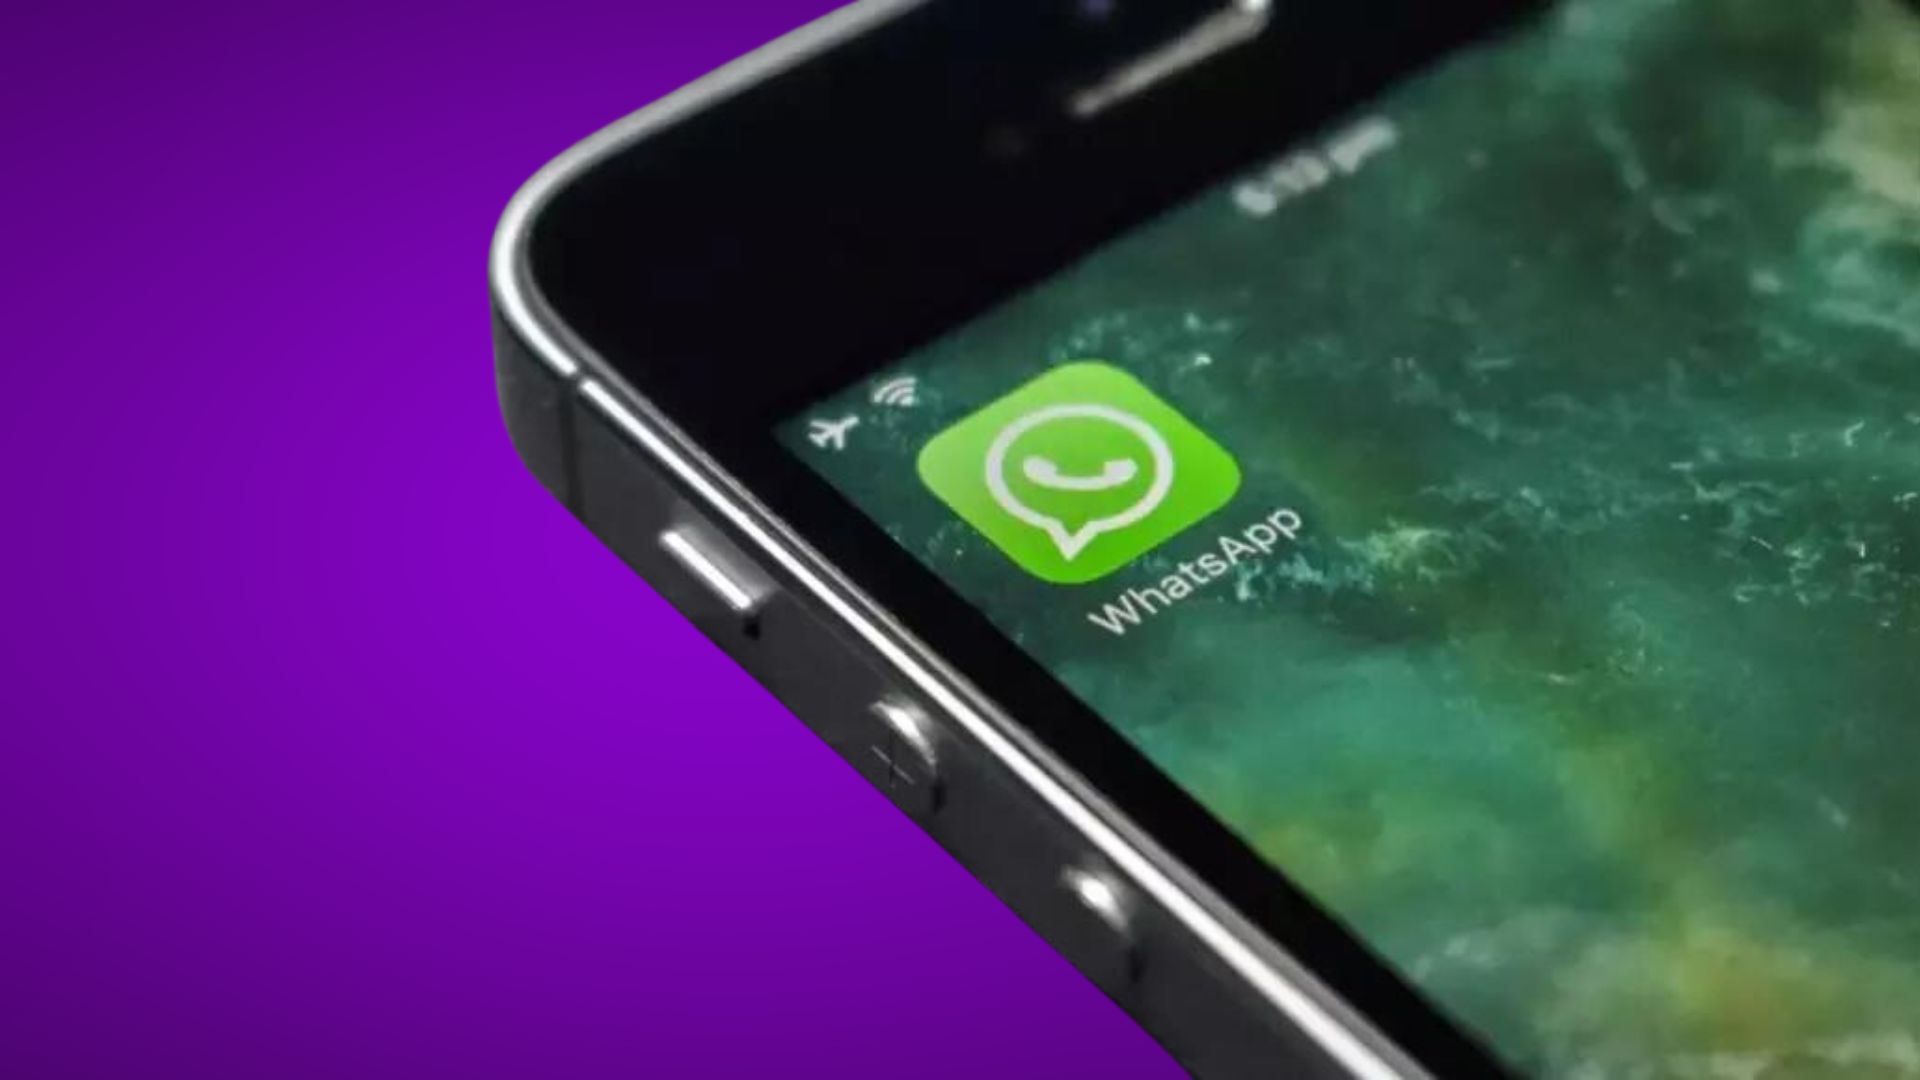 How to Fix WhatsApp Keeps Crashing on iPhone: Top 10 Solutions